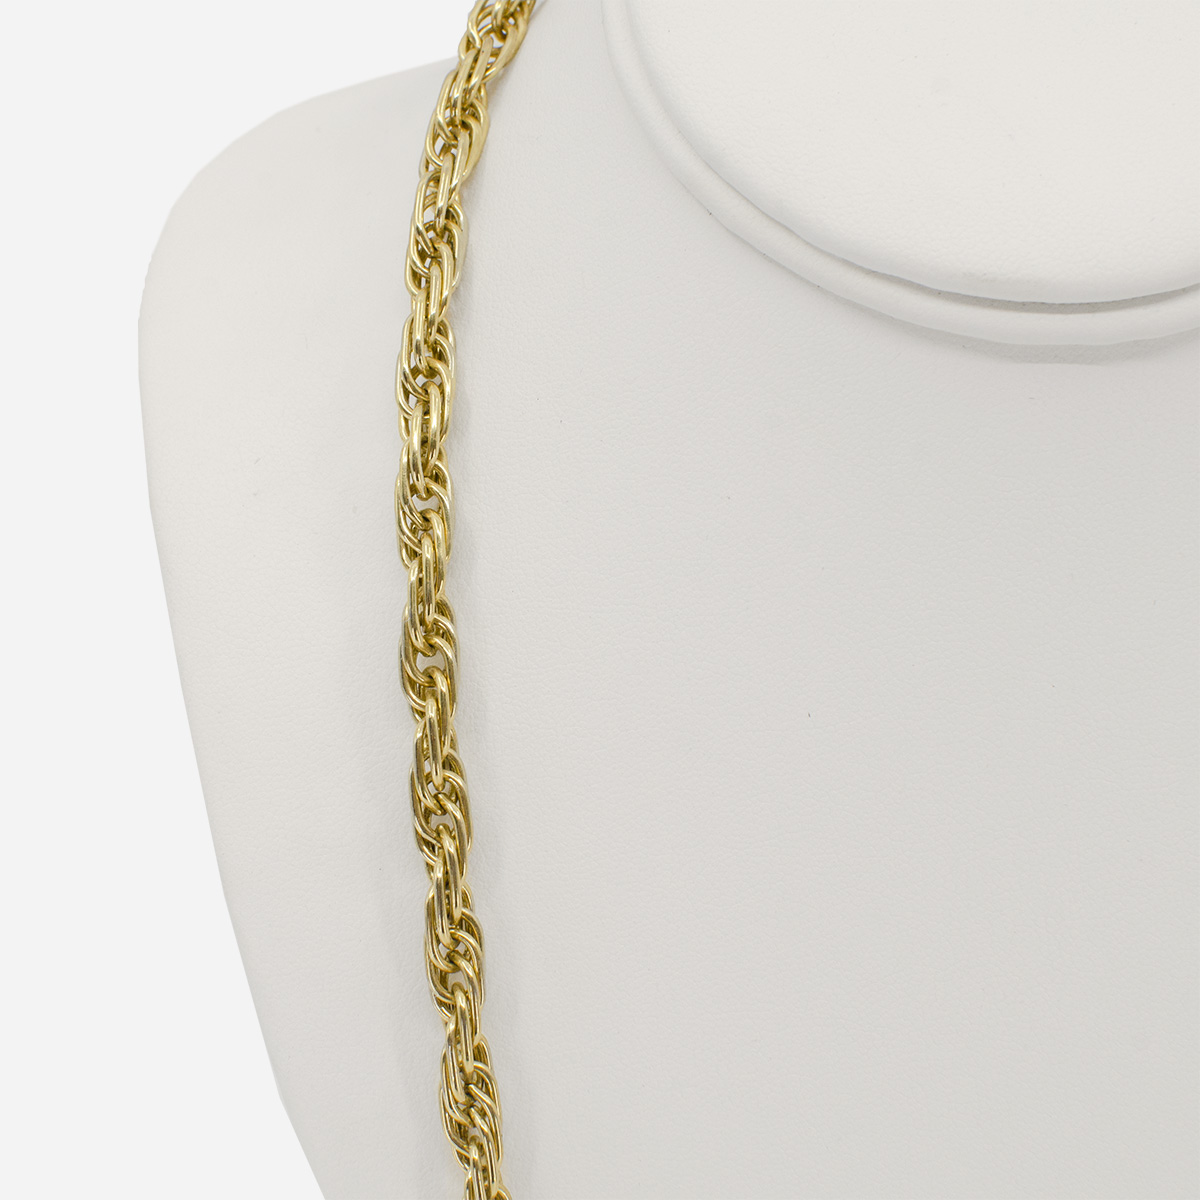 1960s gold chain